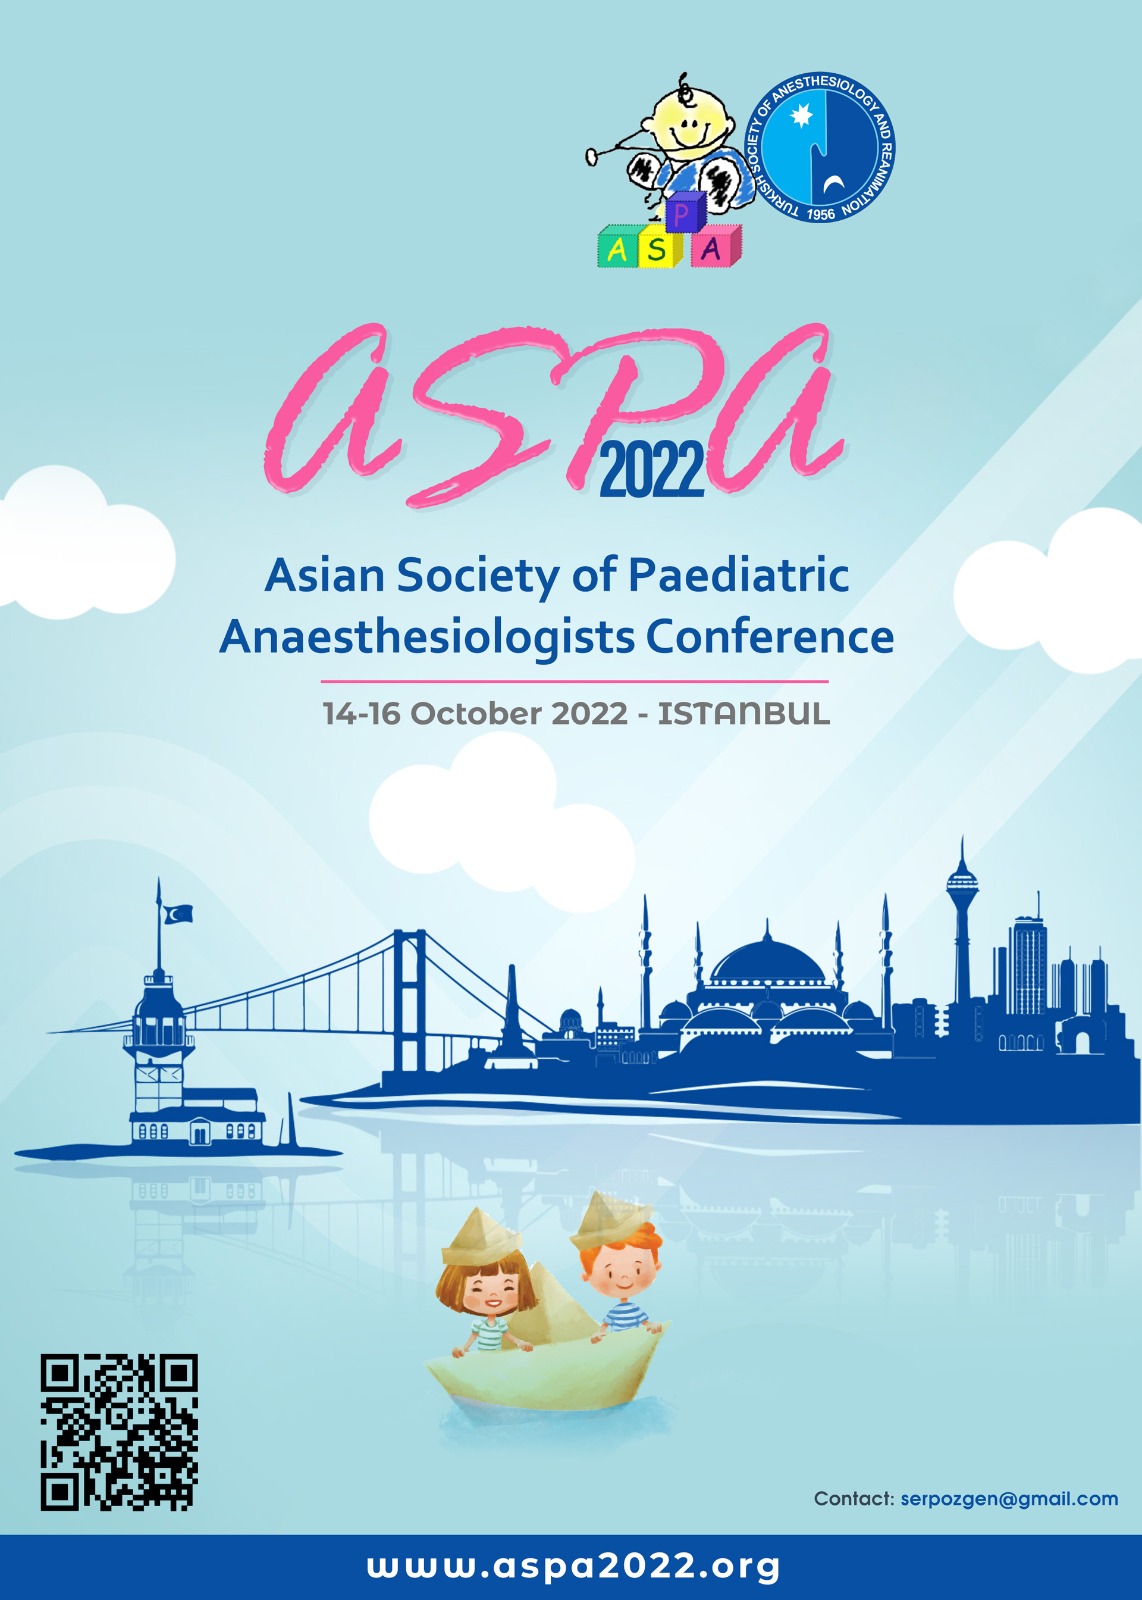 Asian Society of Paediatric Anaesthesiologists Conference